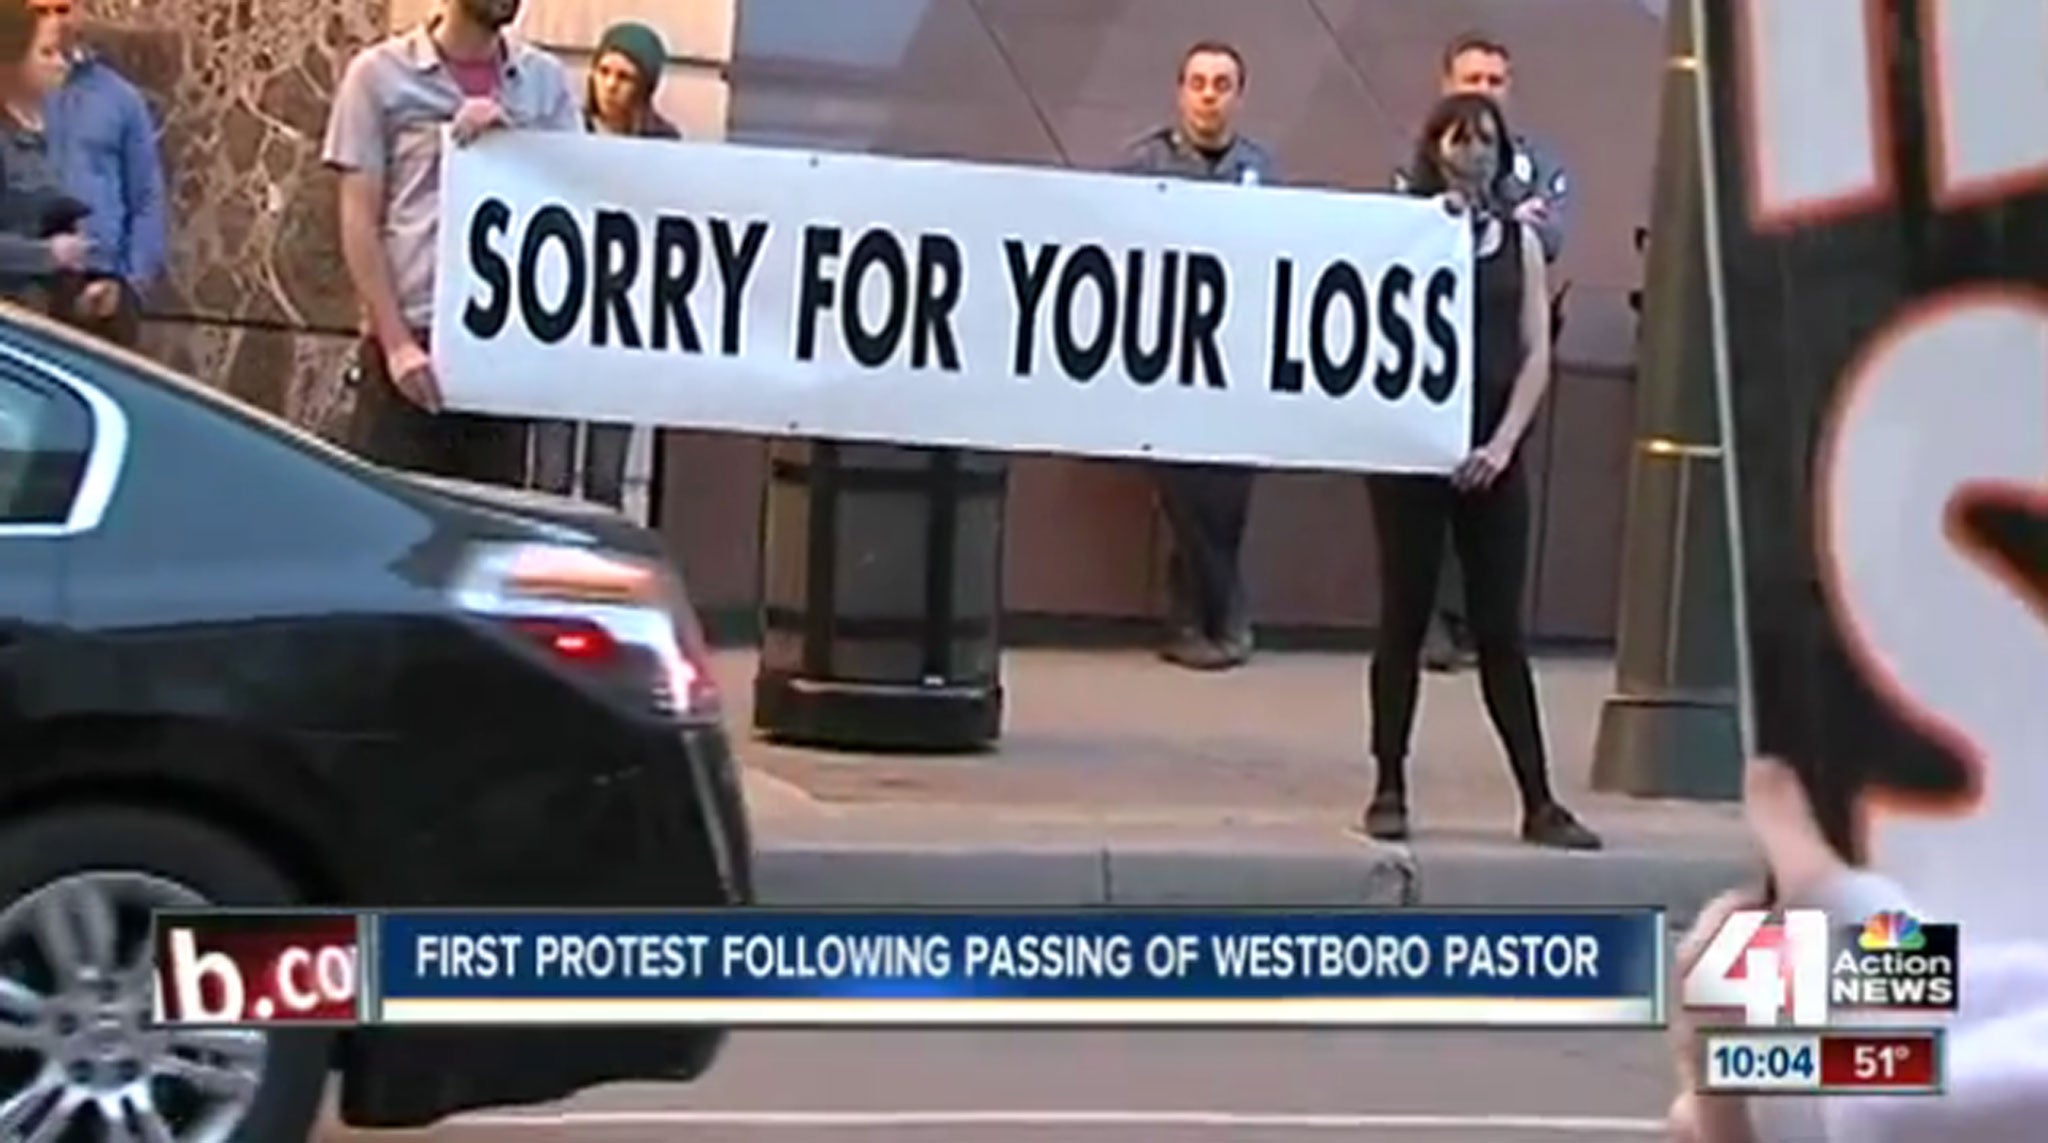 The Westboro Baptist Church was met with this banner on its first protest since the death of founder Fred Phelps